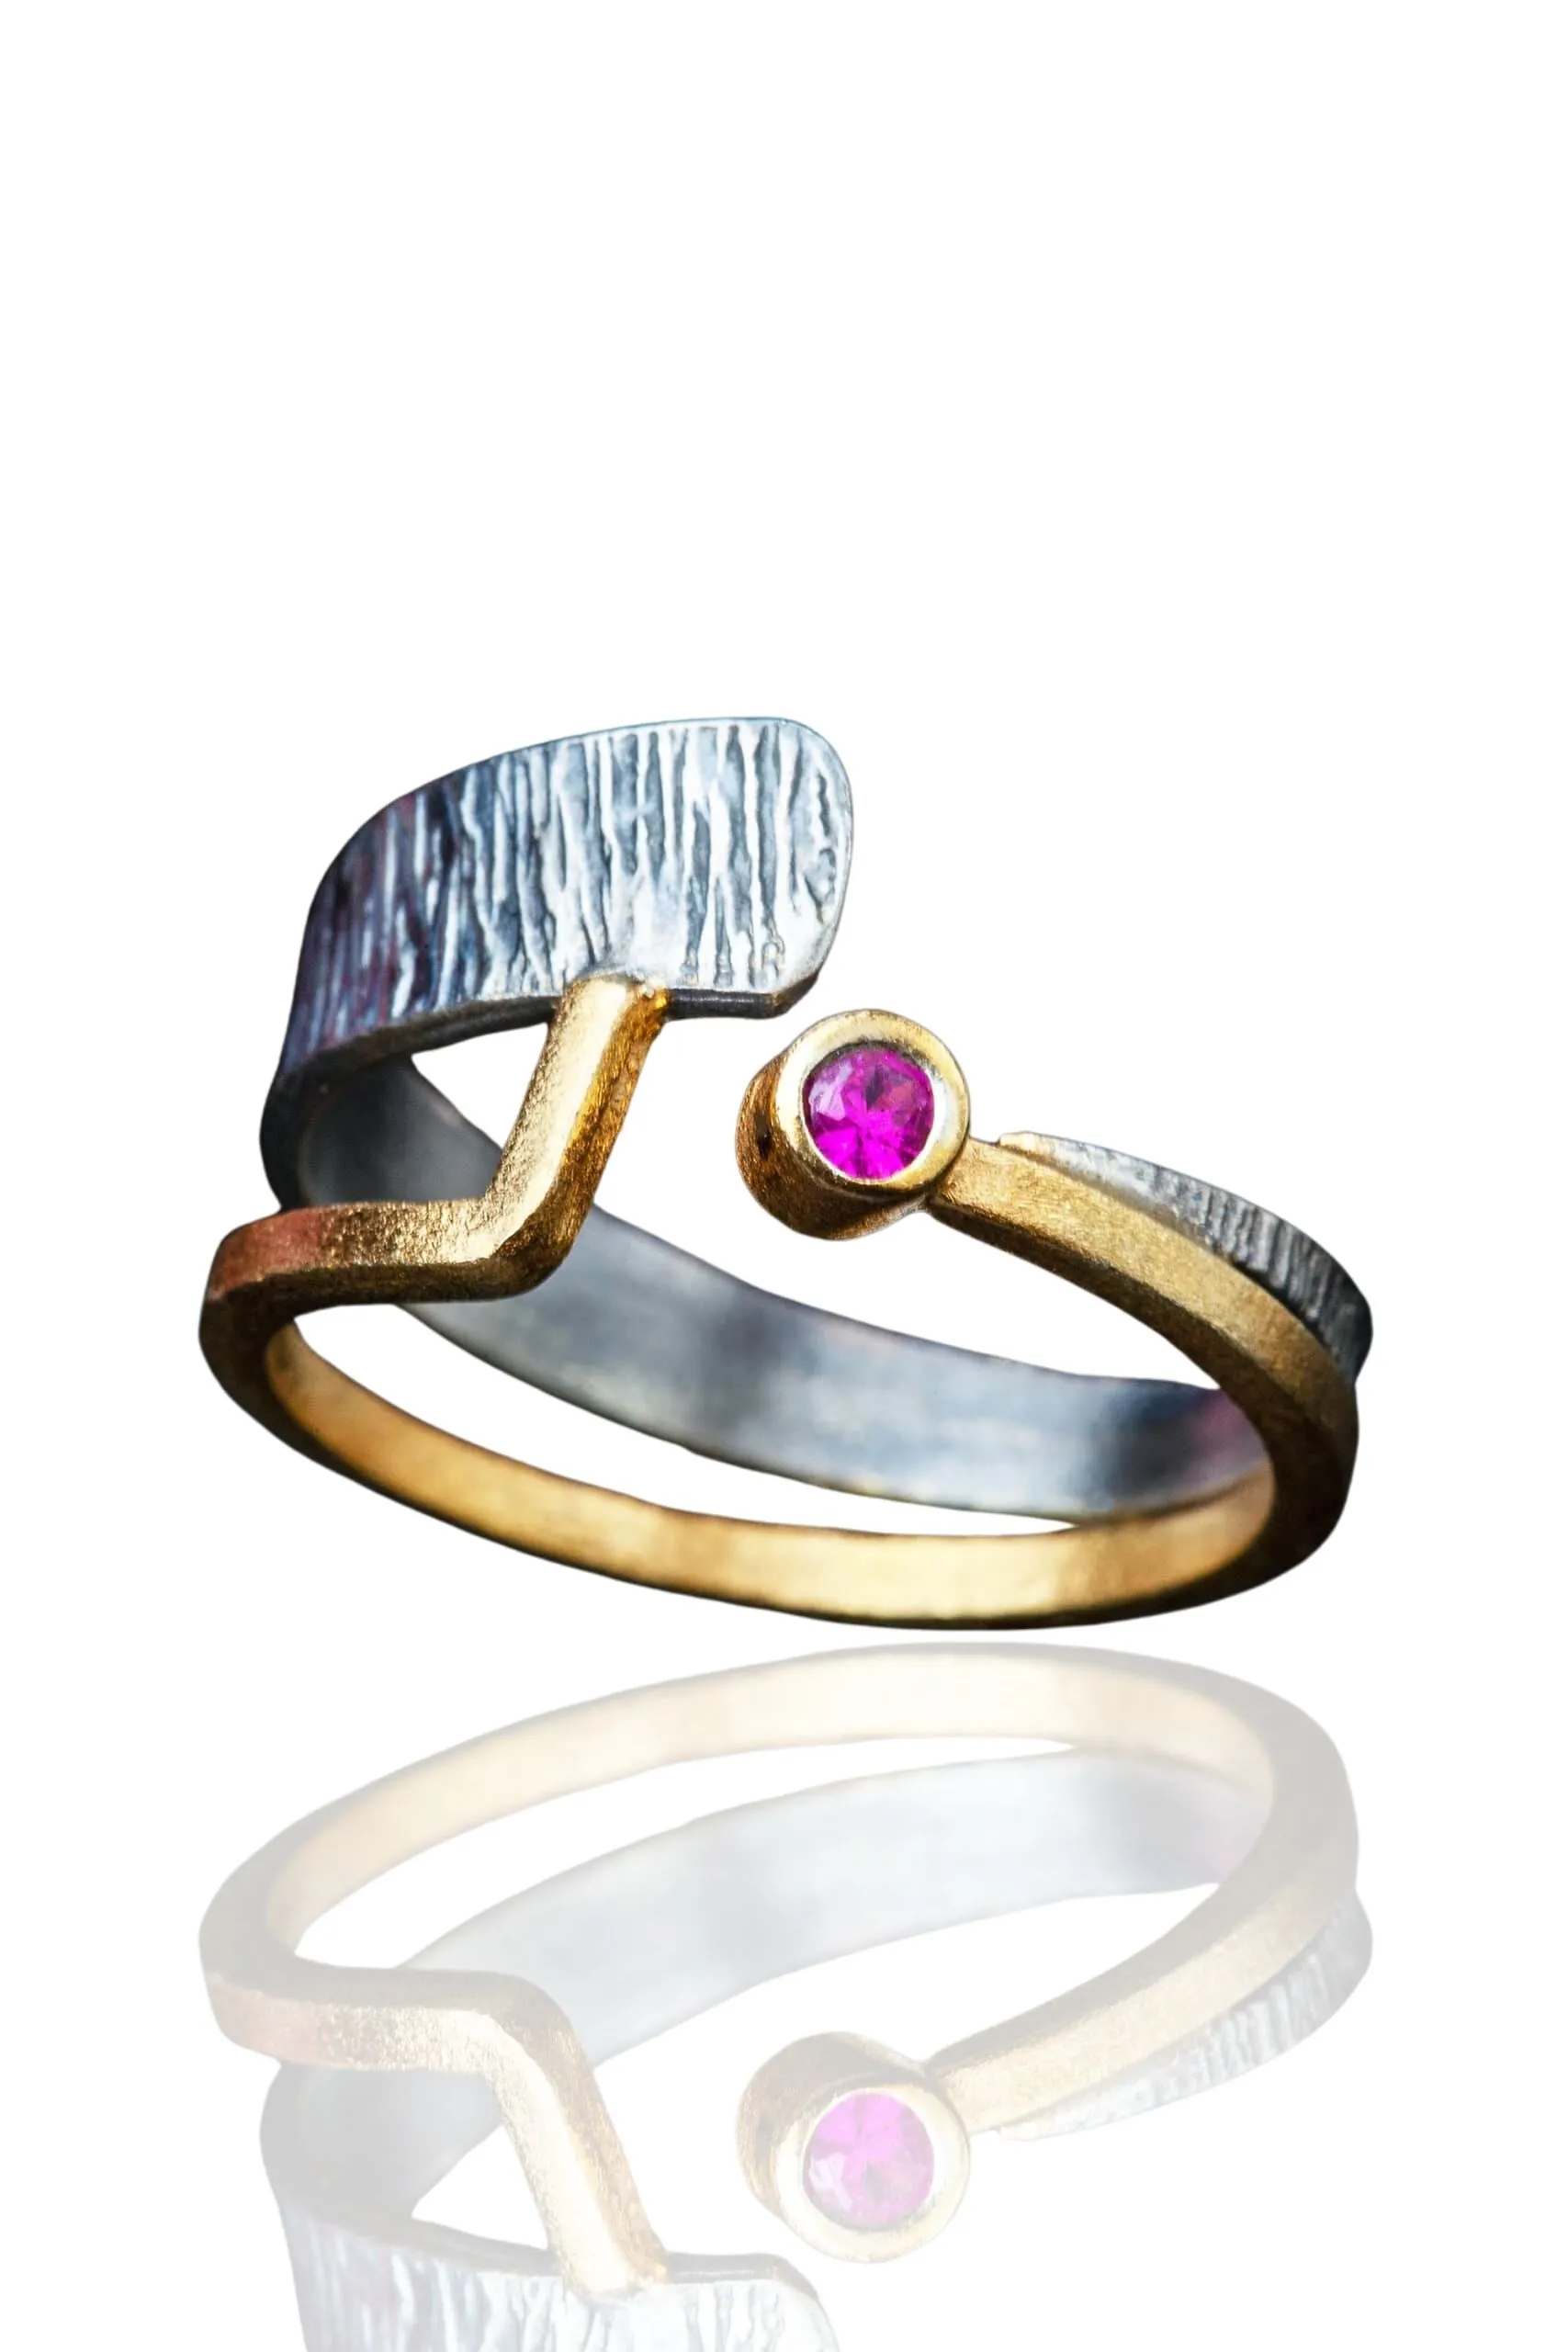 Handmade Jewellery | Silver textured ring with pink zircon main